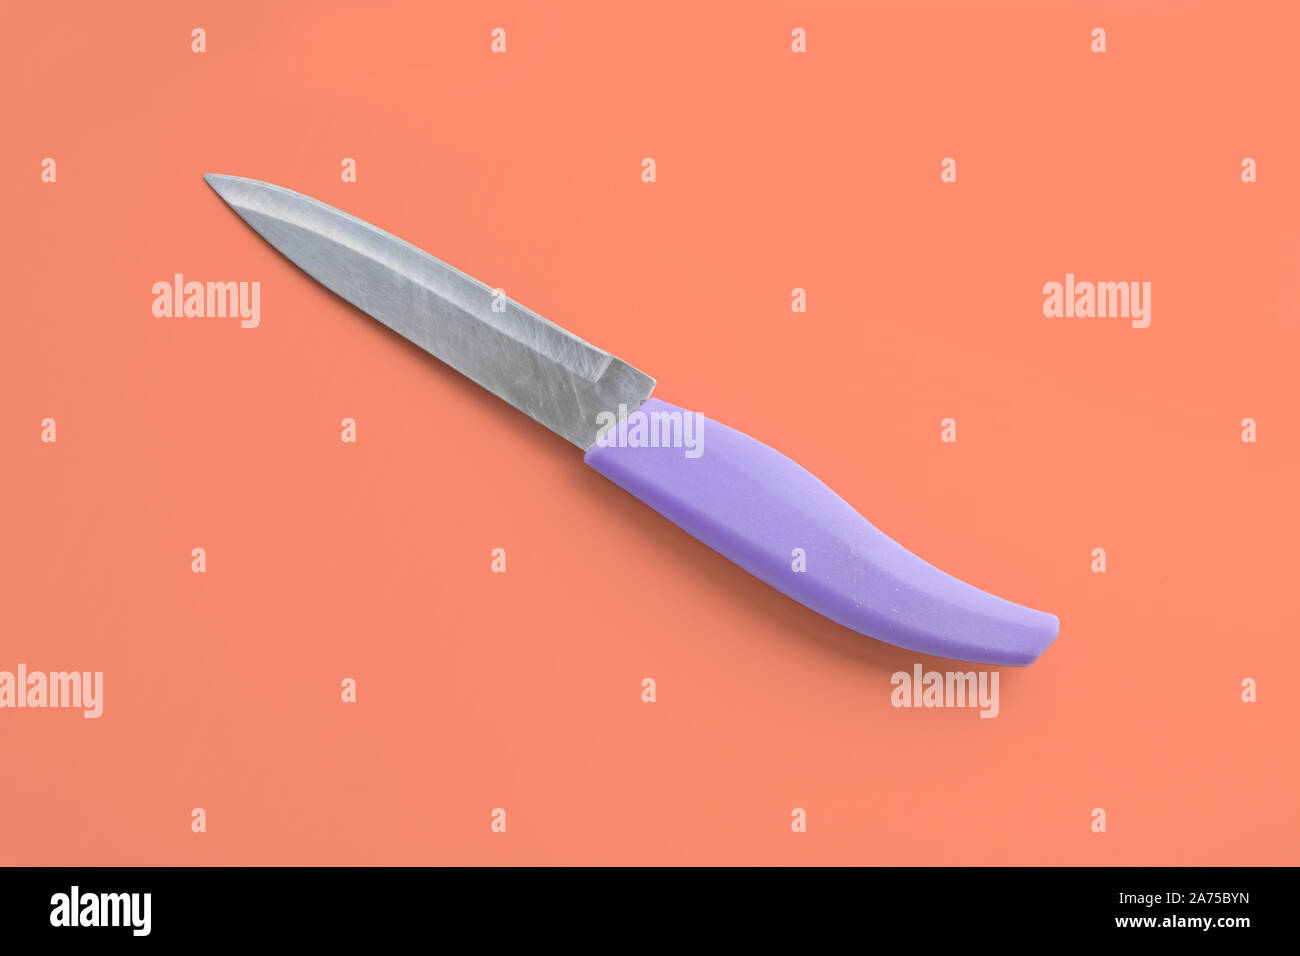 Kitchen utensils - a small knife for vegetables with a plastic handle on a  coral background. Cooking tools Stock Photo - Alamy